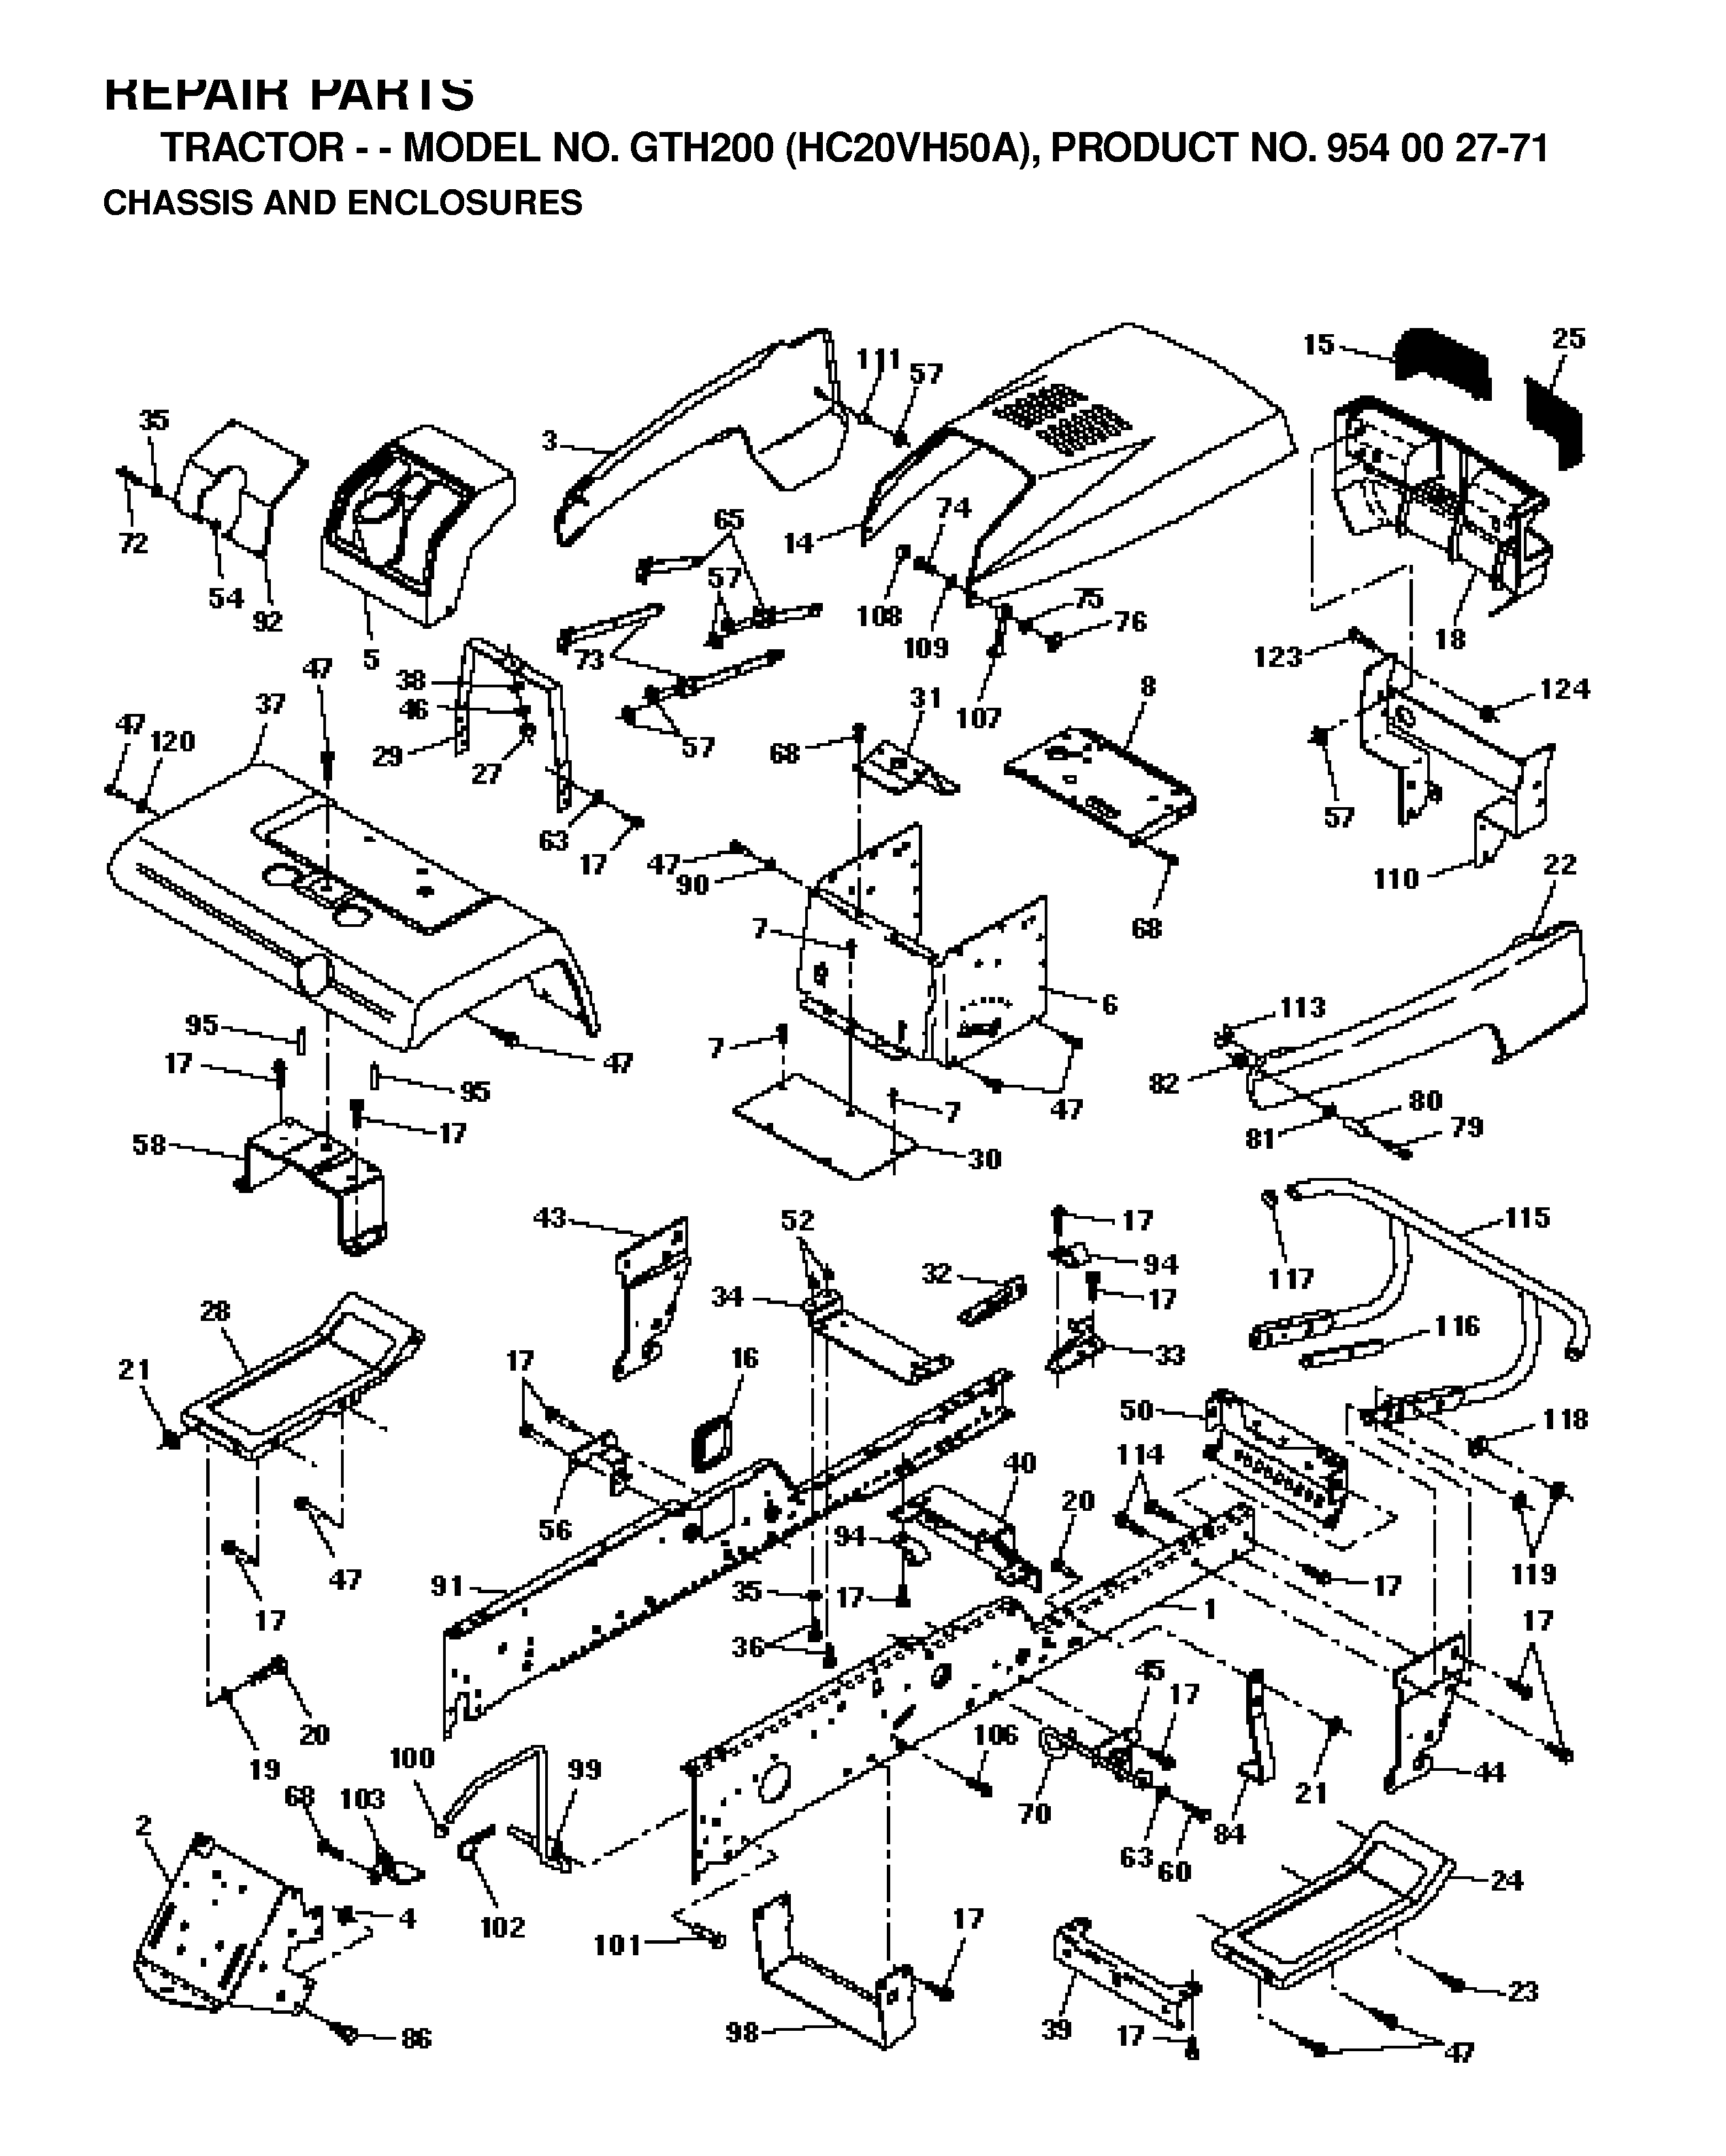 Chassis and appendix 532144737, 532140506, 532143364, 873800700, 532140452, 532145053, 596437001, 532185518, 532125454, 532157068, 532121794, 817490612, 532127325, 734117201, 874760616, 596322601, 532143365, 817490616, 532147202, 532124251, 532050675, 532147203, 532145205, 532145052, 532145183, 532141315, 532141314, 532142131, 734116301, 596030501, 532140002422, 596029801, 532175278, 532156111, 532136939, 532136940, 532155887, 734115441, 596564001, 532136575, 596040501, 596040501, 532155886, 532108067, 532137113, 817490620, 819131614, 532155013, 596030701, 532177679, 874180512, 532106784, 871191008, 810071000, 596987401, 874981024, 532007206, 734114601, 873271000, 532142992, 874760716, 596238701, 532141626, 532100207, 532105531, 532175847, 532140871, 532071673, 599972501, 532004497, 532142273, 584953901, 532109808, 532110356, 532110357, 532140625, 532127316, 532146525, 583611601, 532141460, 532141461, 532143679, 734117201, 596322601, 596140201, 532123481, 586668901, 532008022